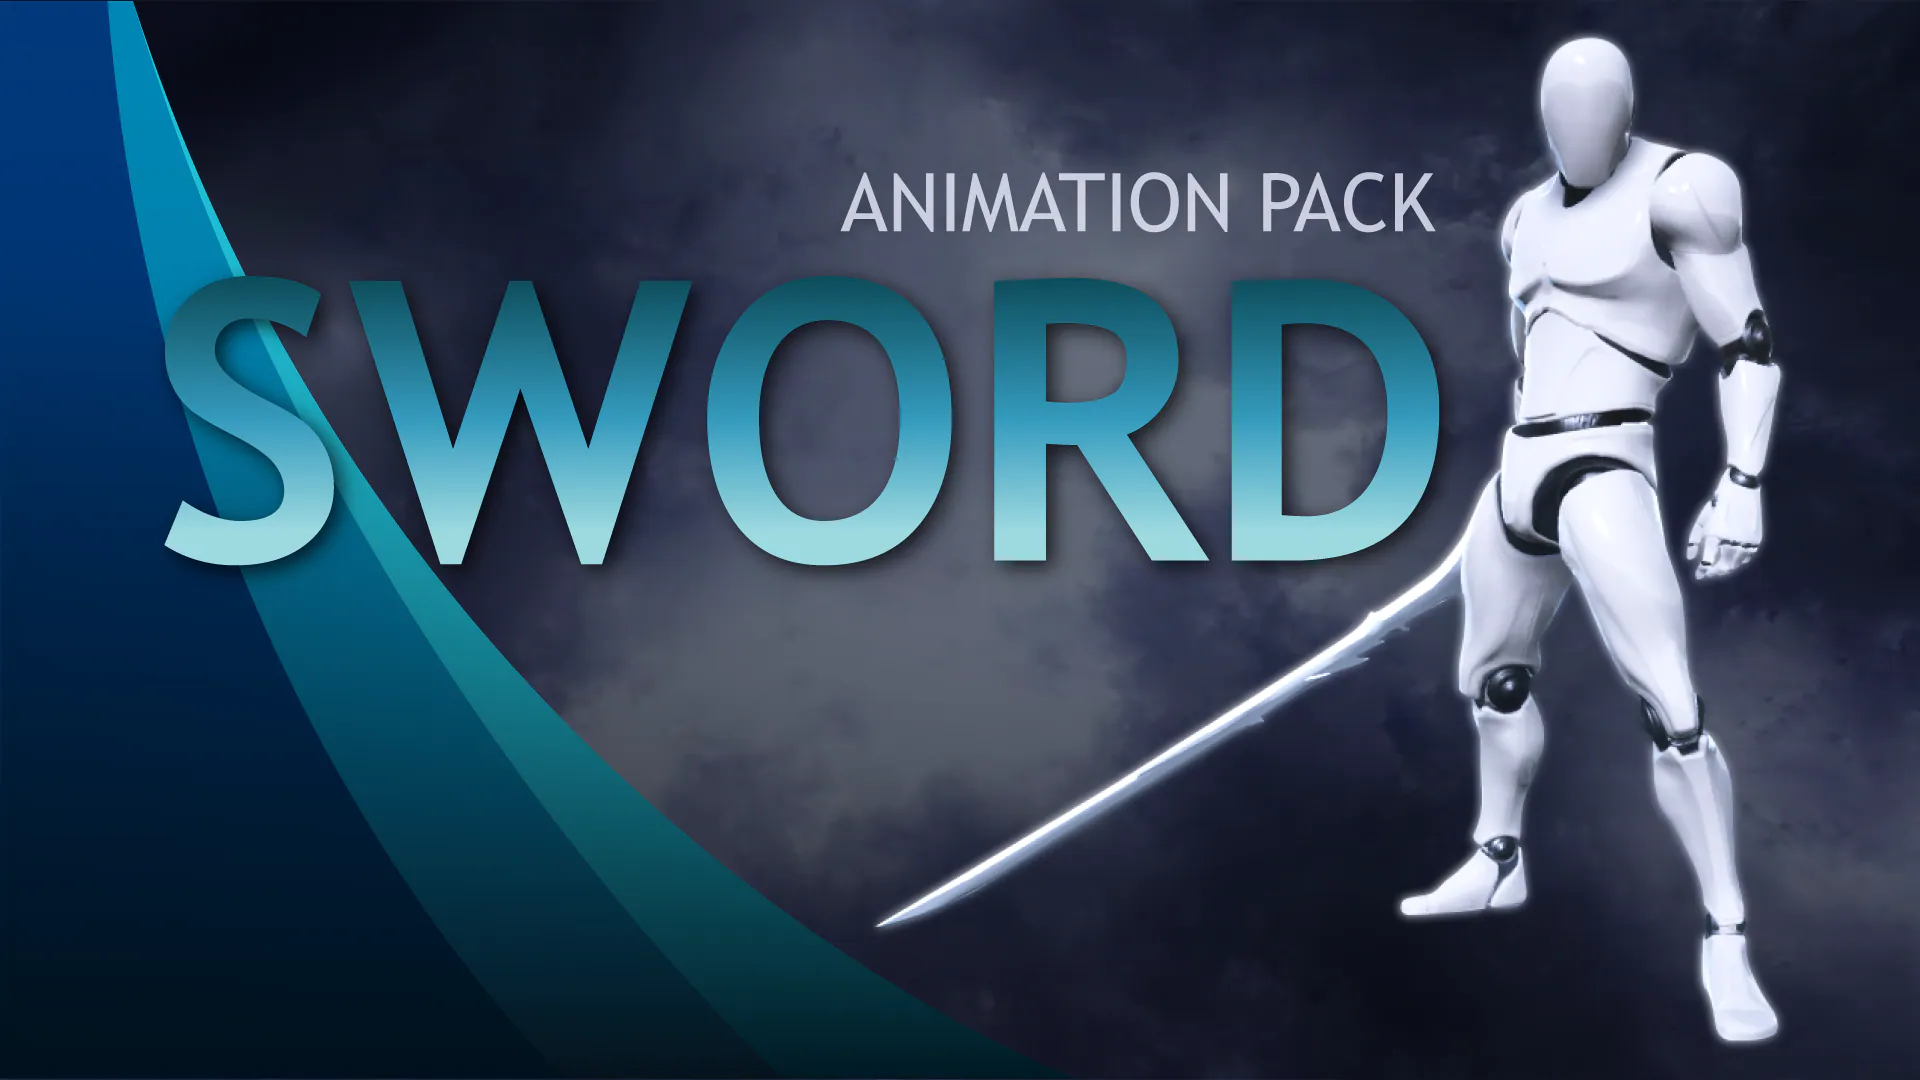 Sword Animation Pack (Unreal Engine)